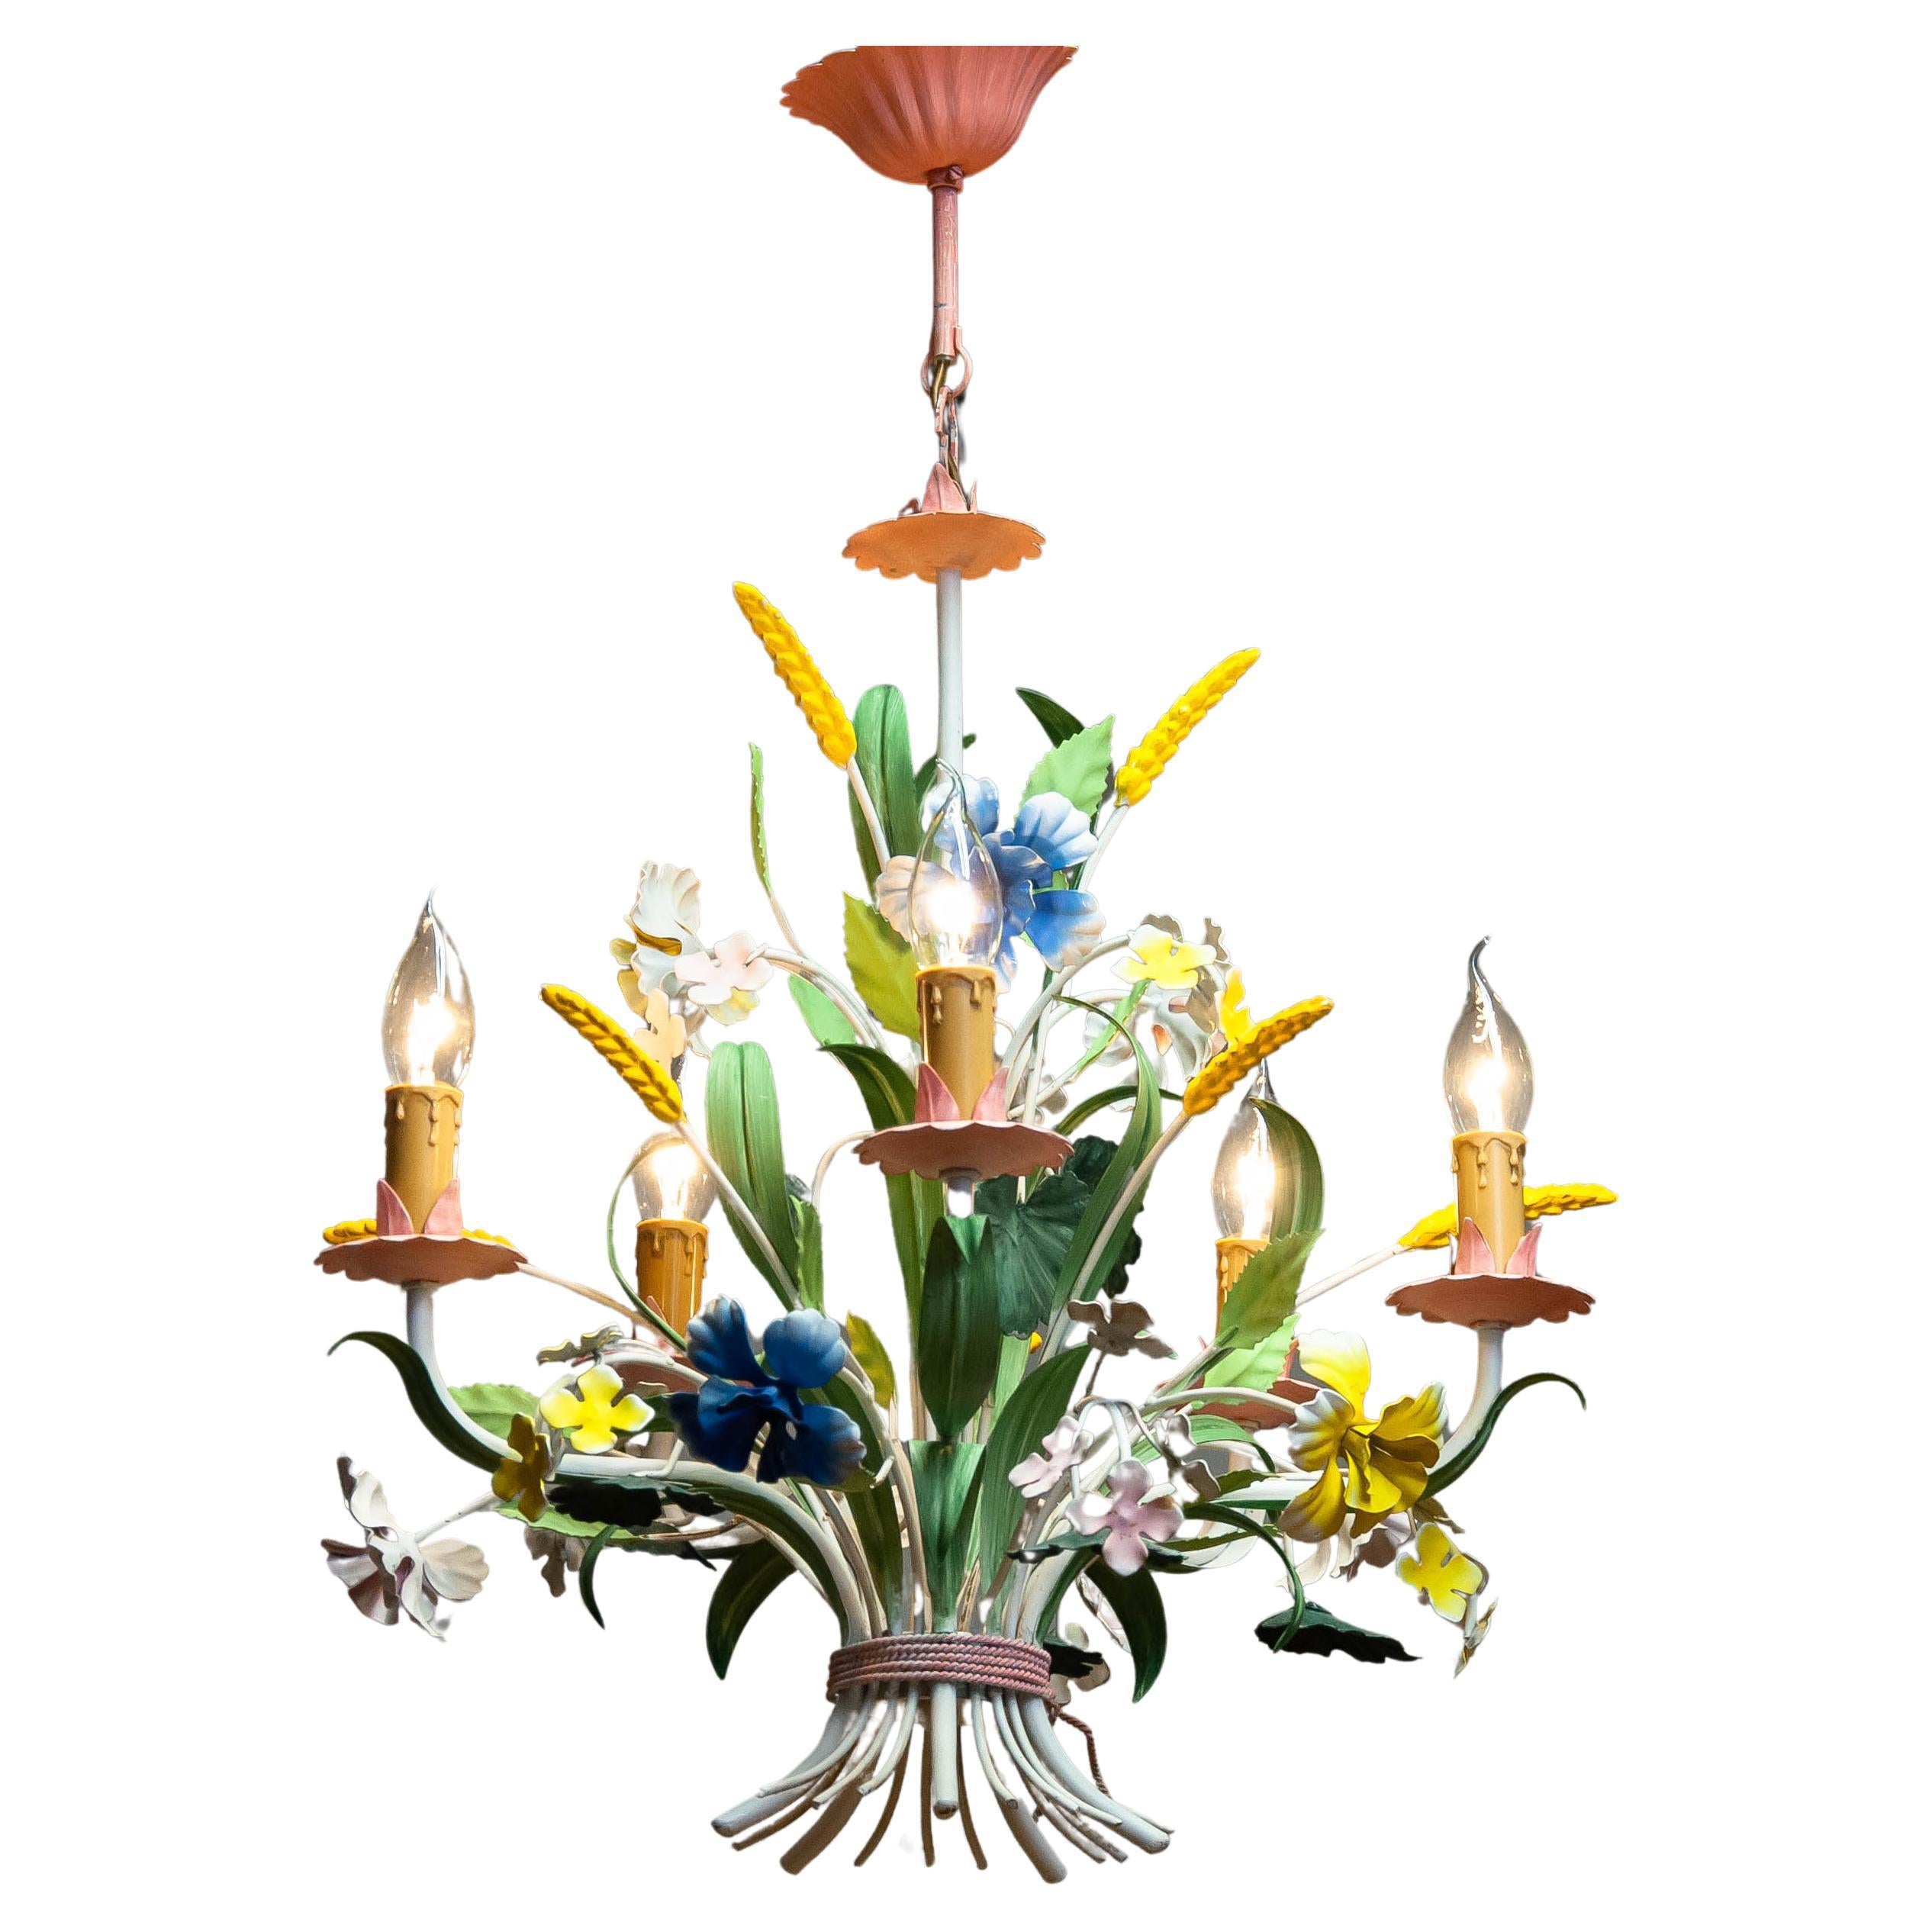 1960s Bright Boho Chic Italian Tole Painted Metal Chandelier With Floral Decor